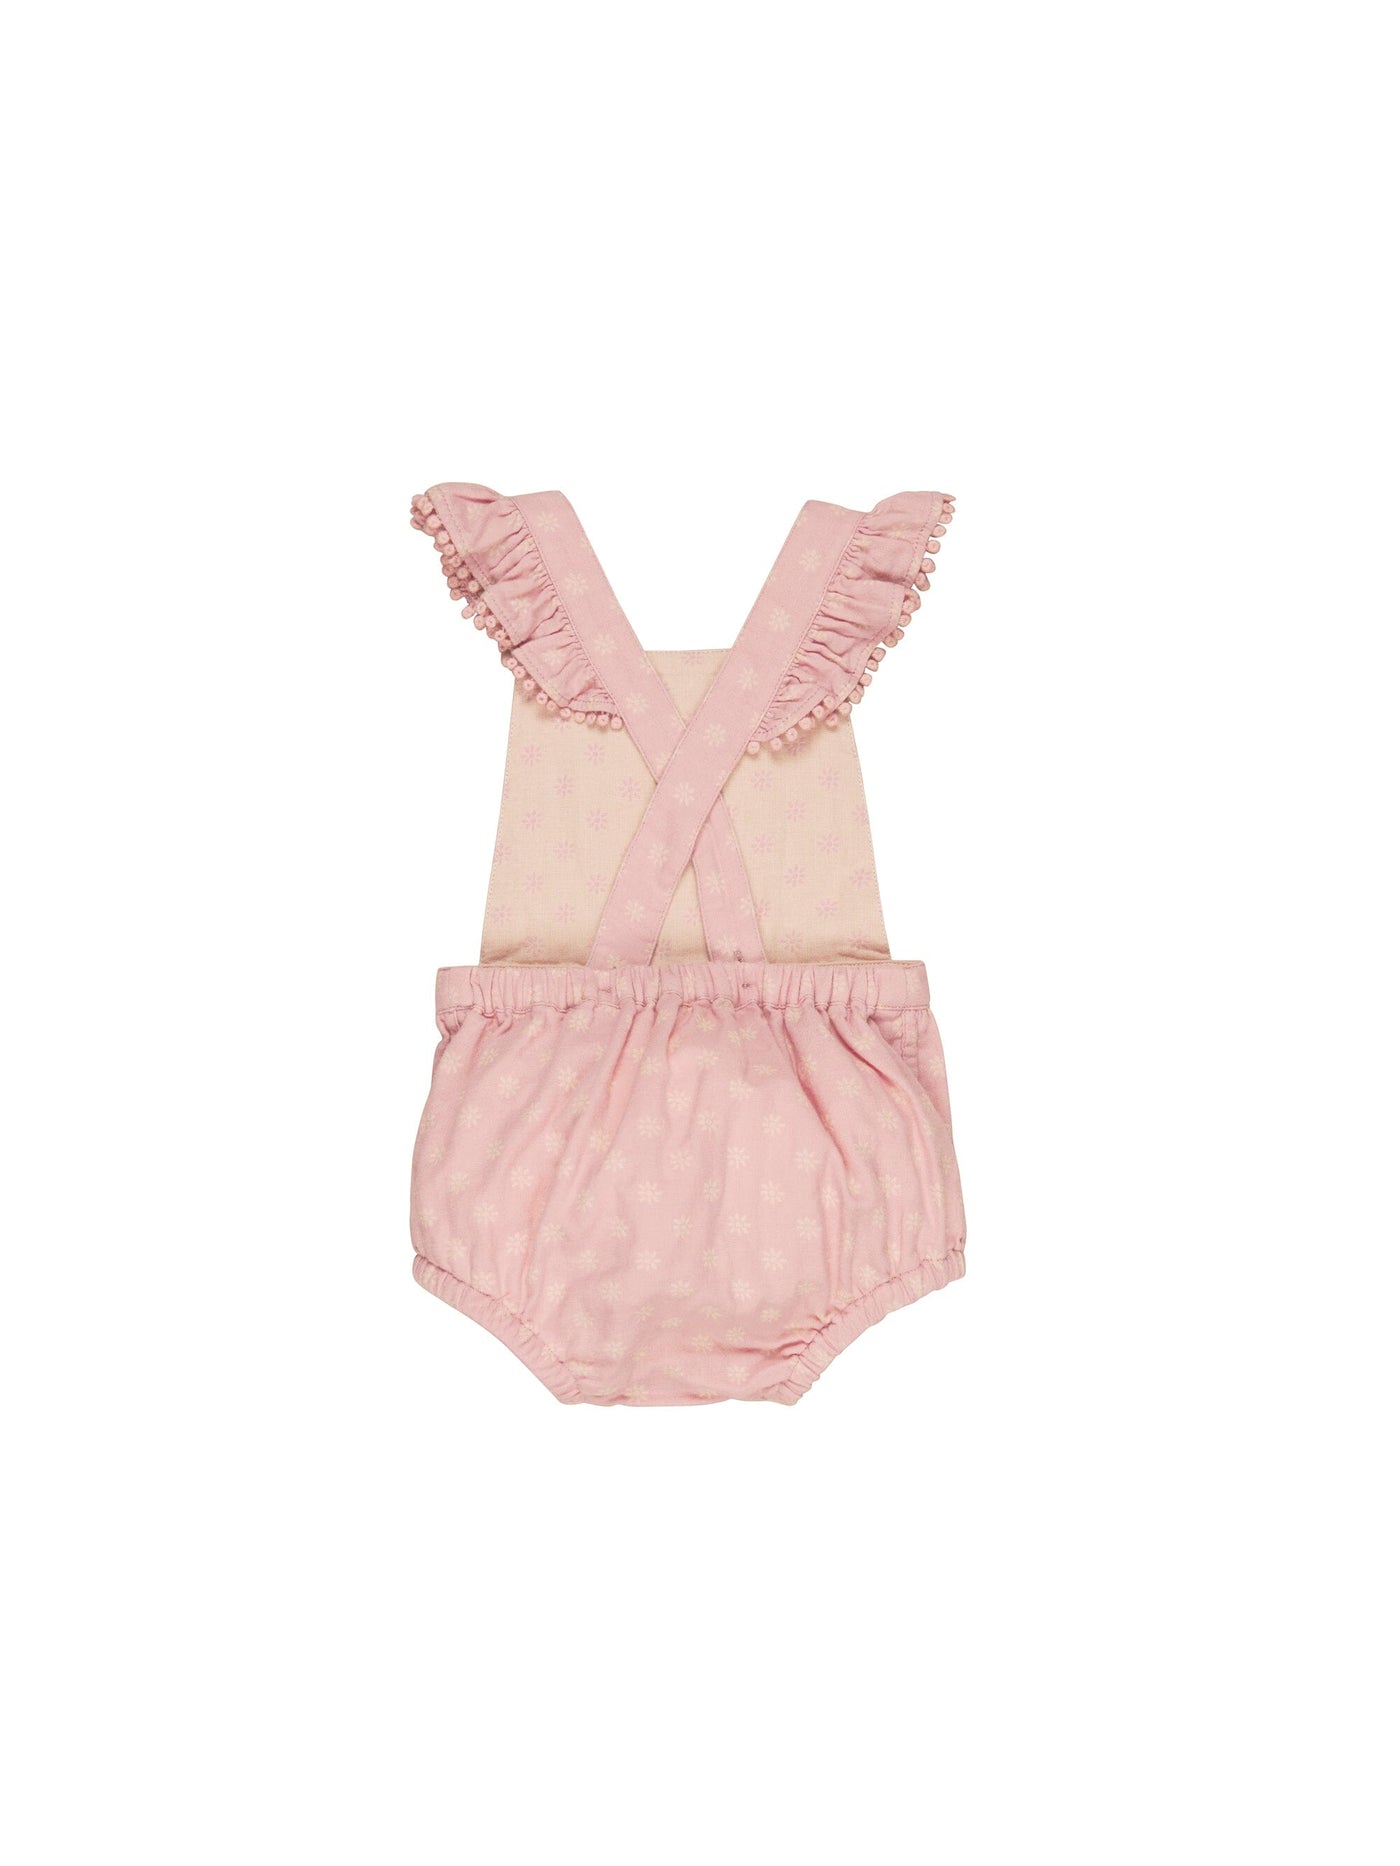 Huxbaby Daisy Reversible Playsuit HB020S23 Playsuit Huxbaby 